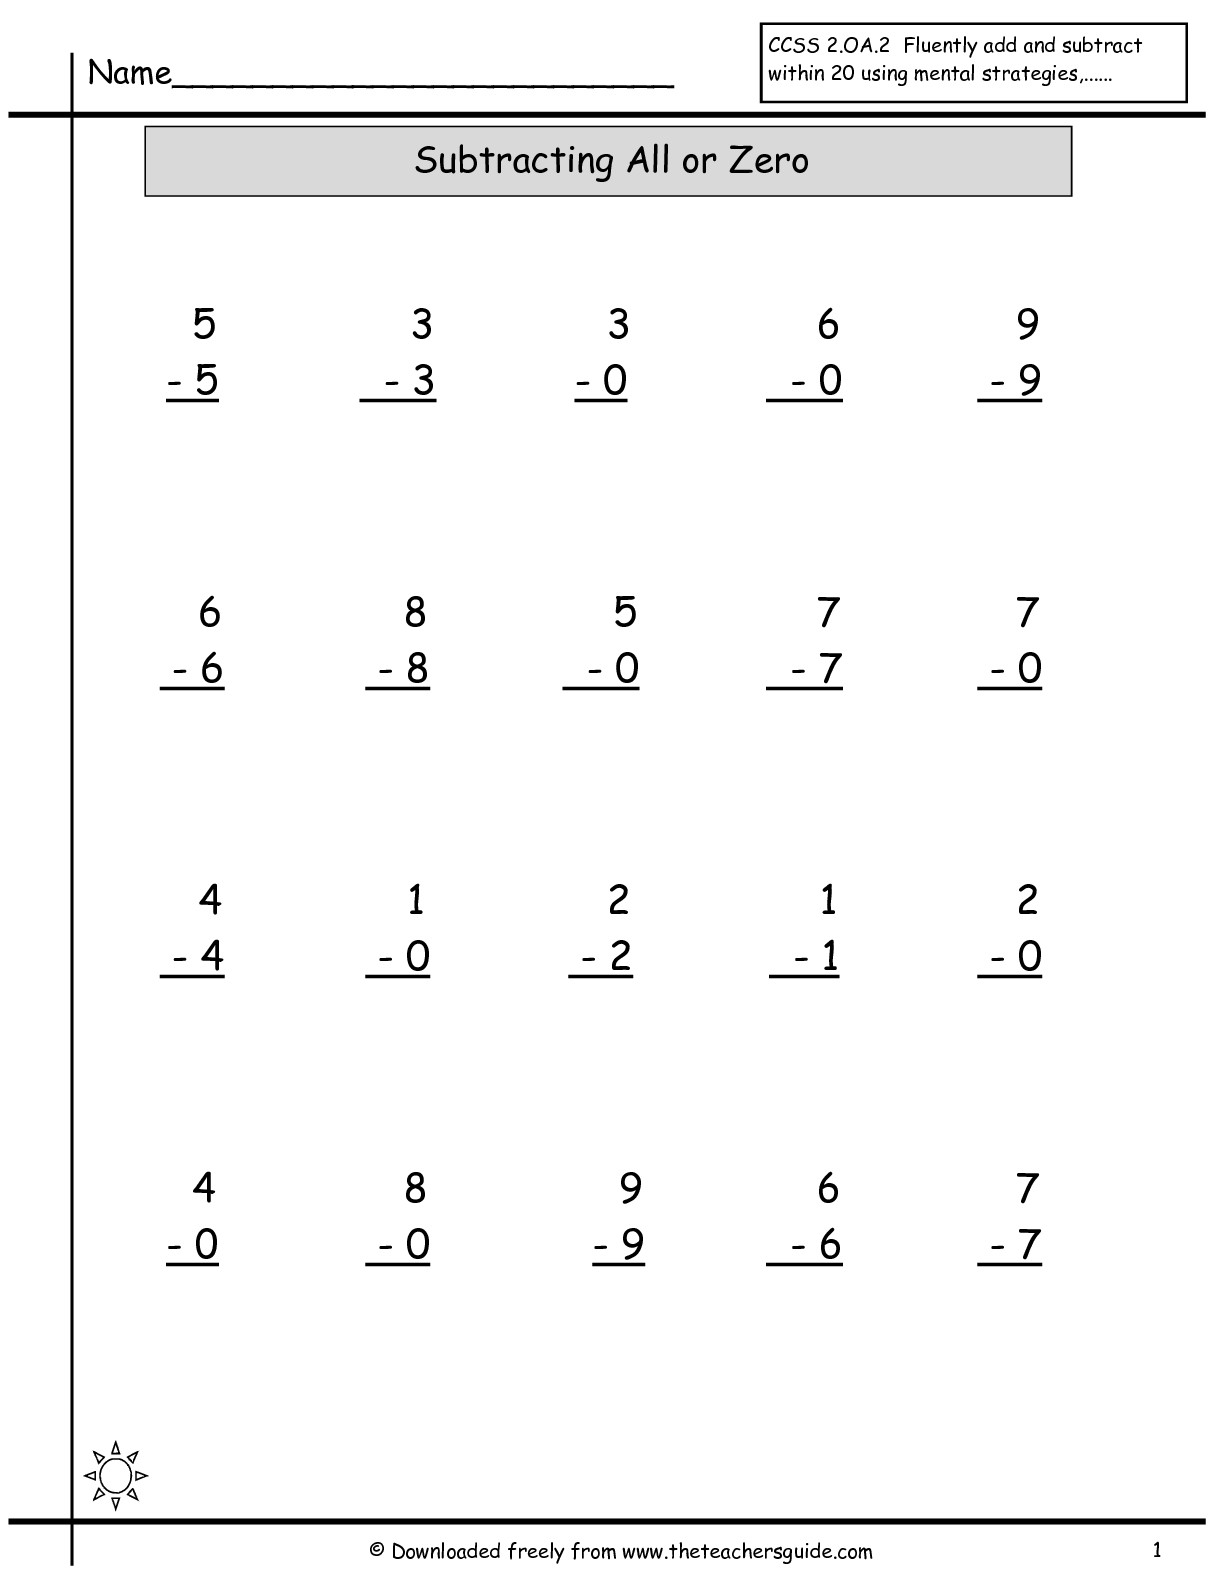 15 Best Images of Single Addition And Subtraction Worksheets - Single